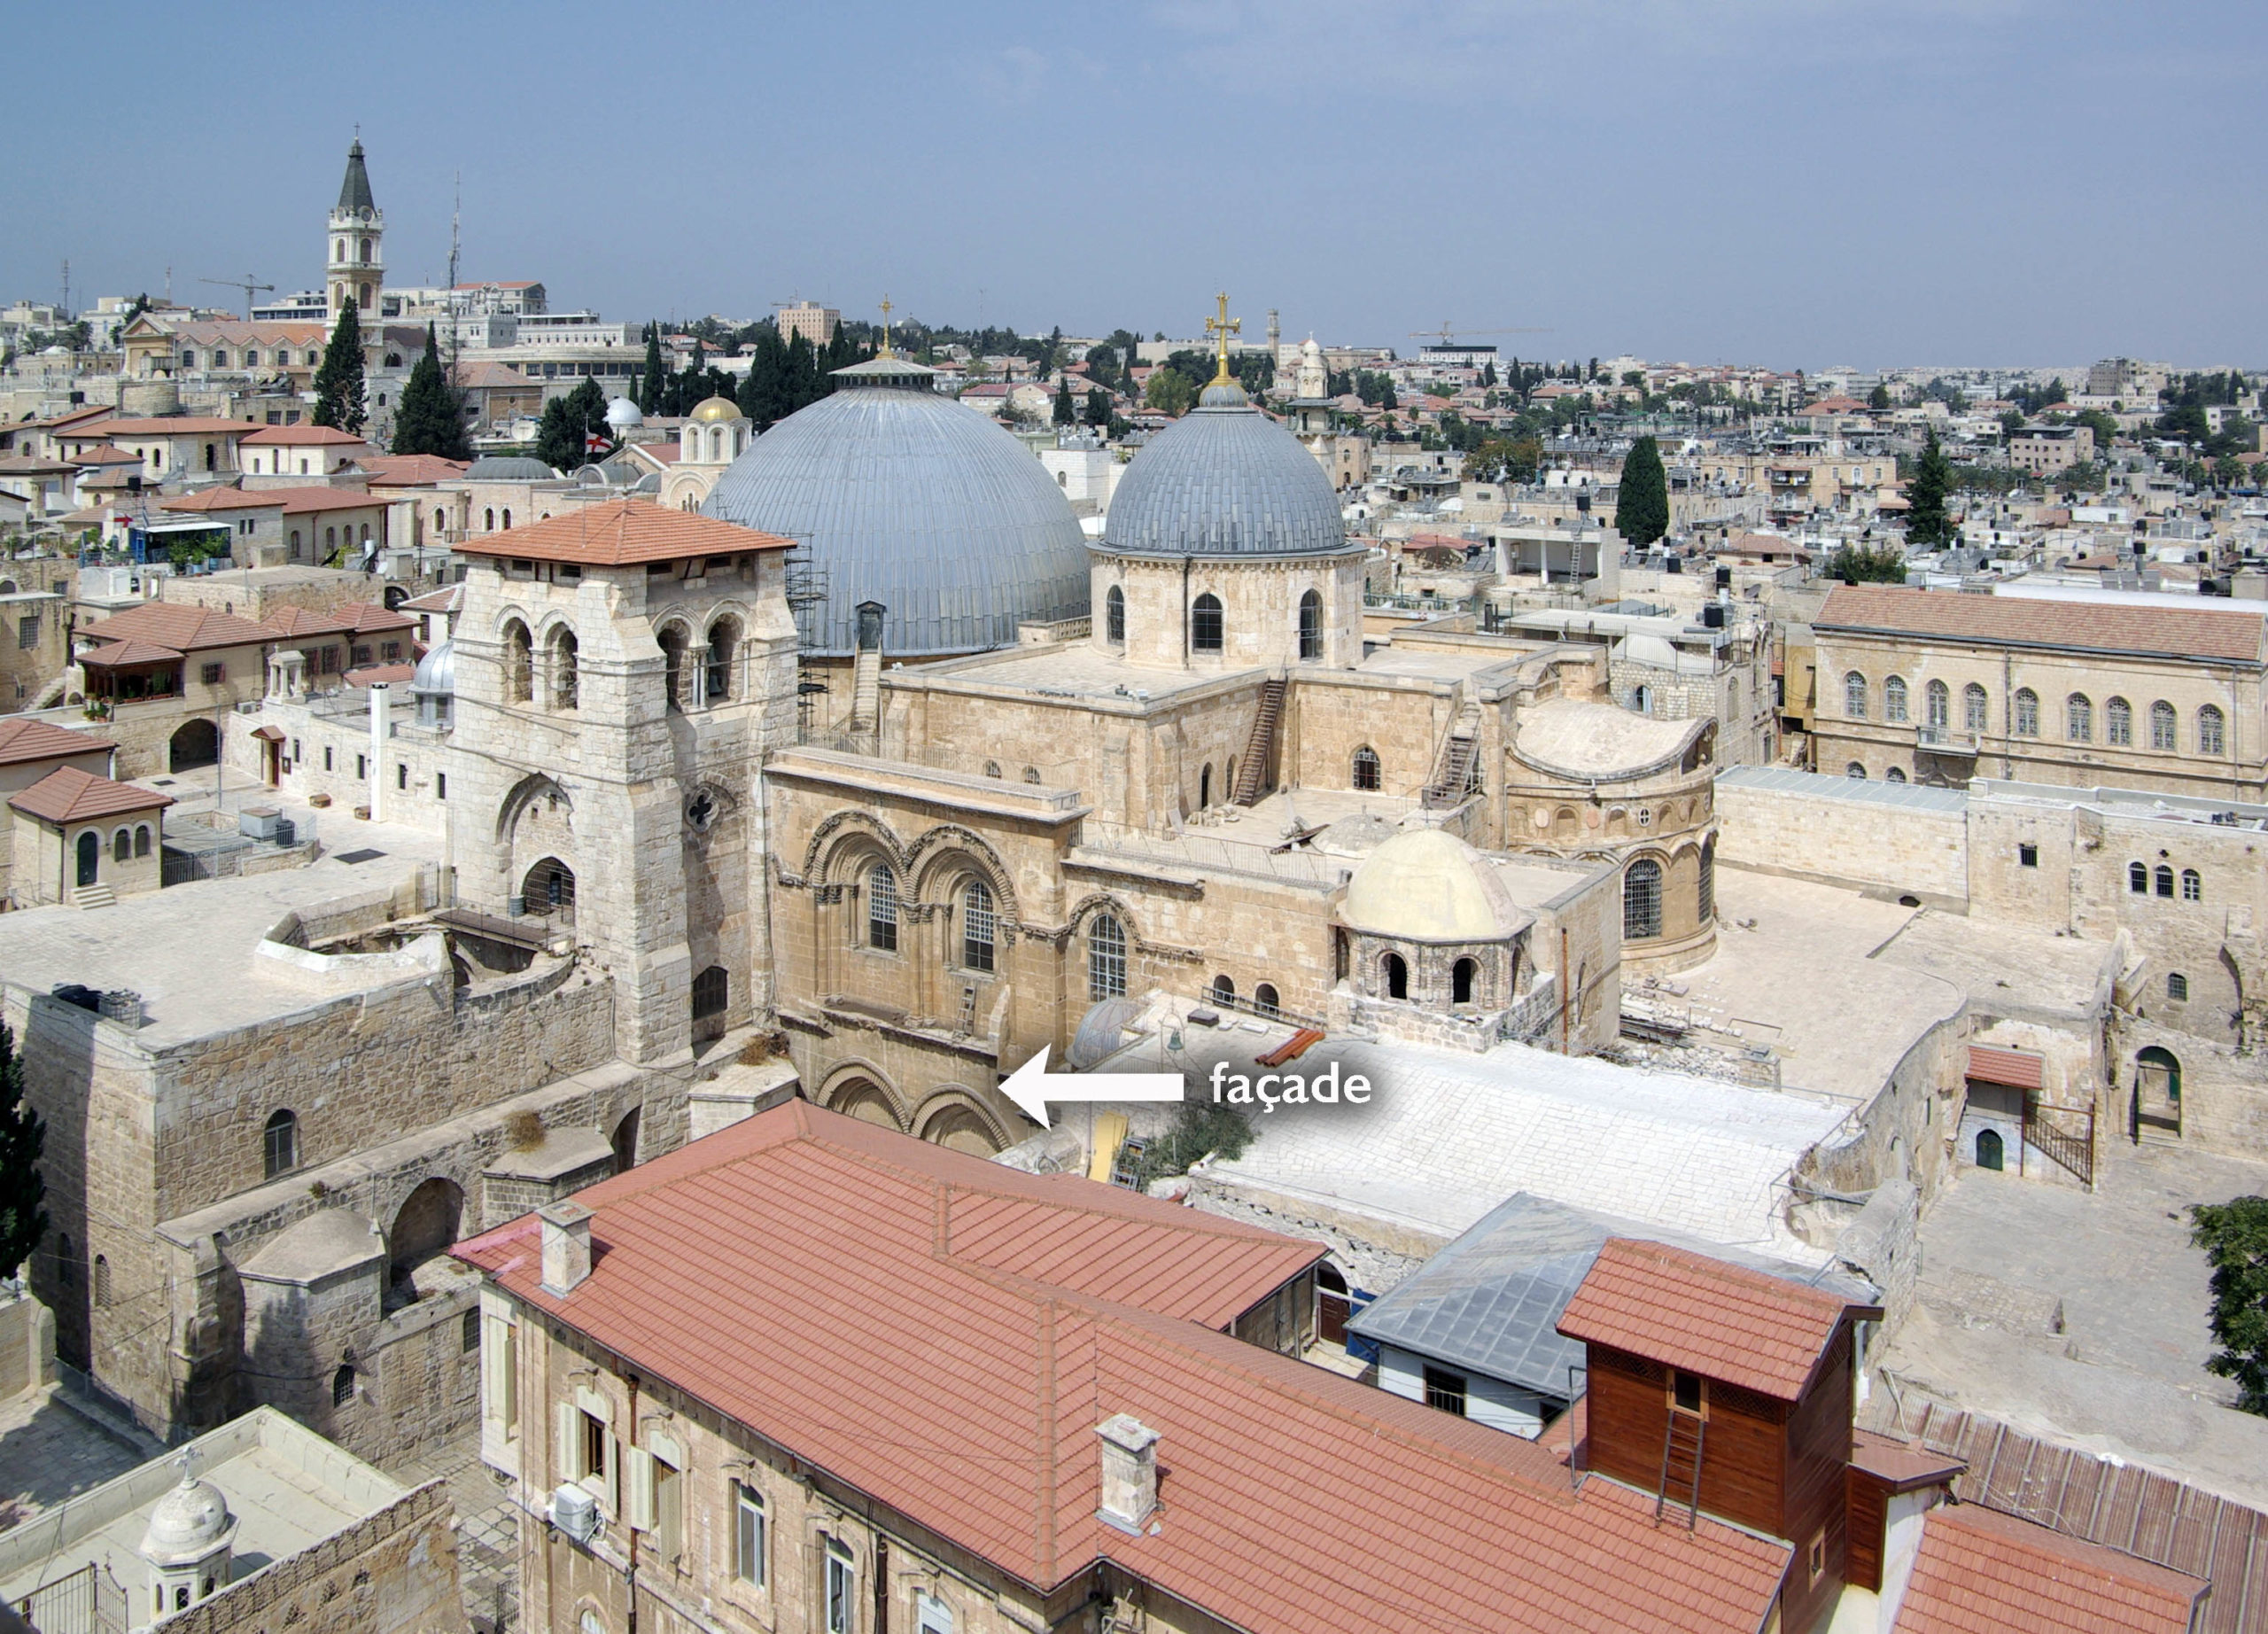 Church of the Holy Sepulchre, Jerusalem (photo: Berthold Werner, CC BY-SA 3.0)